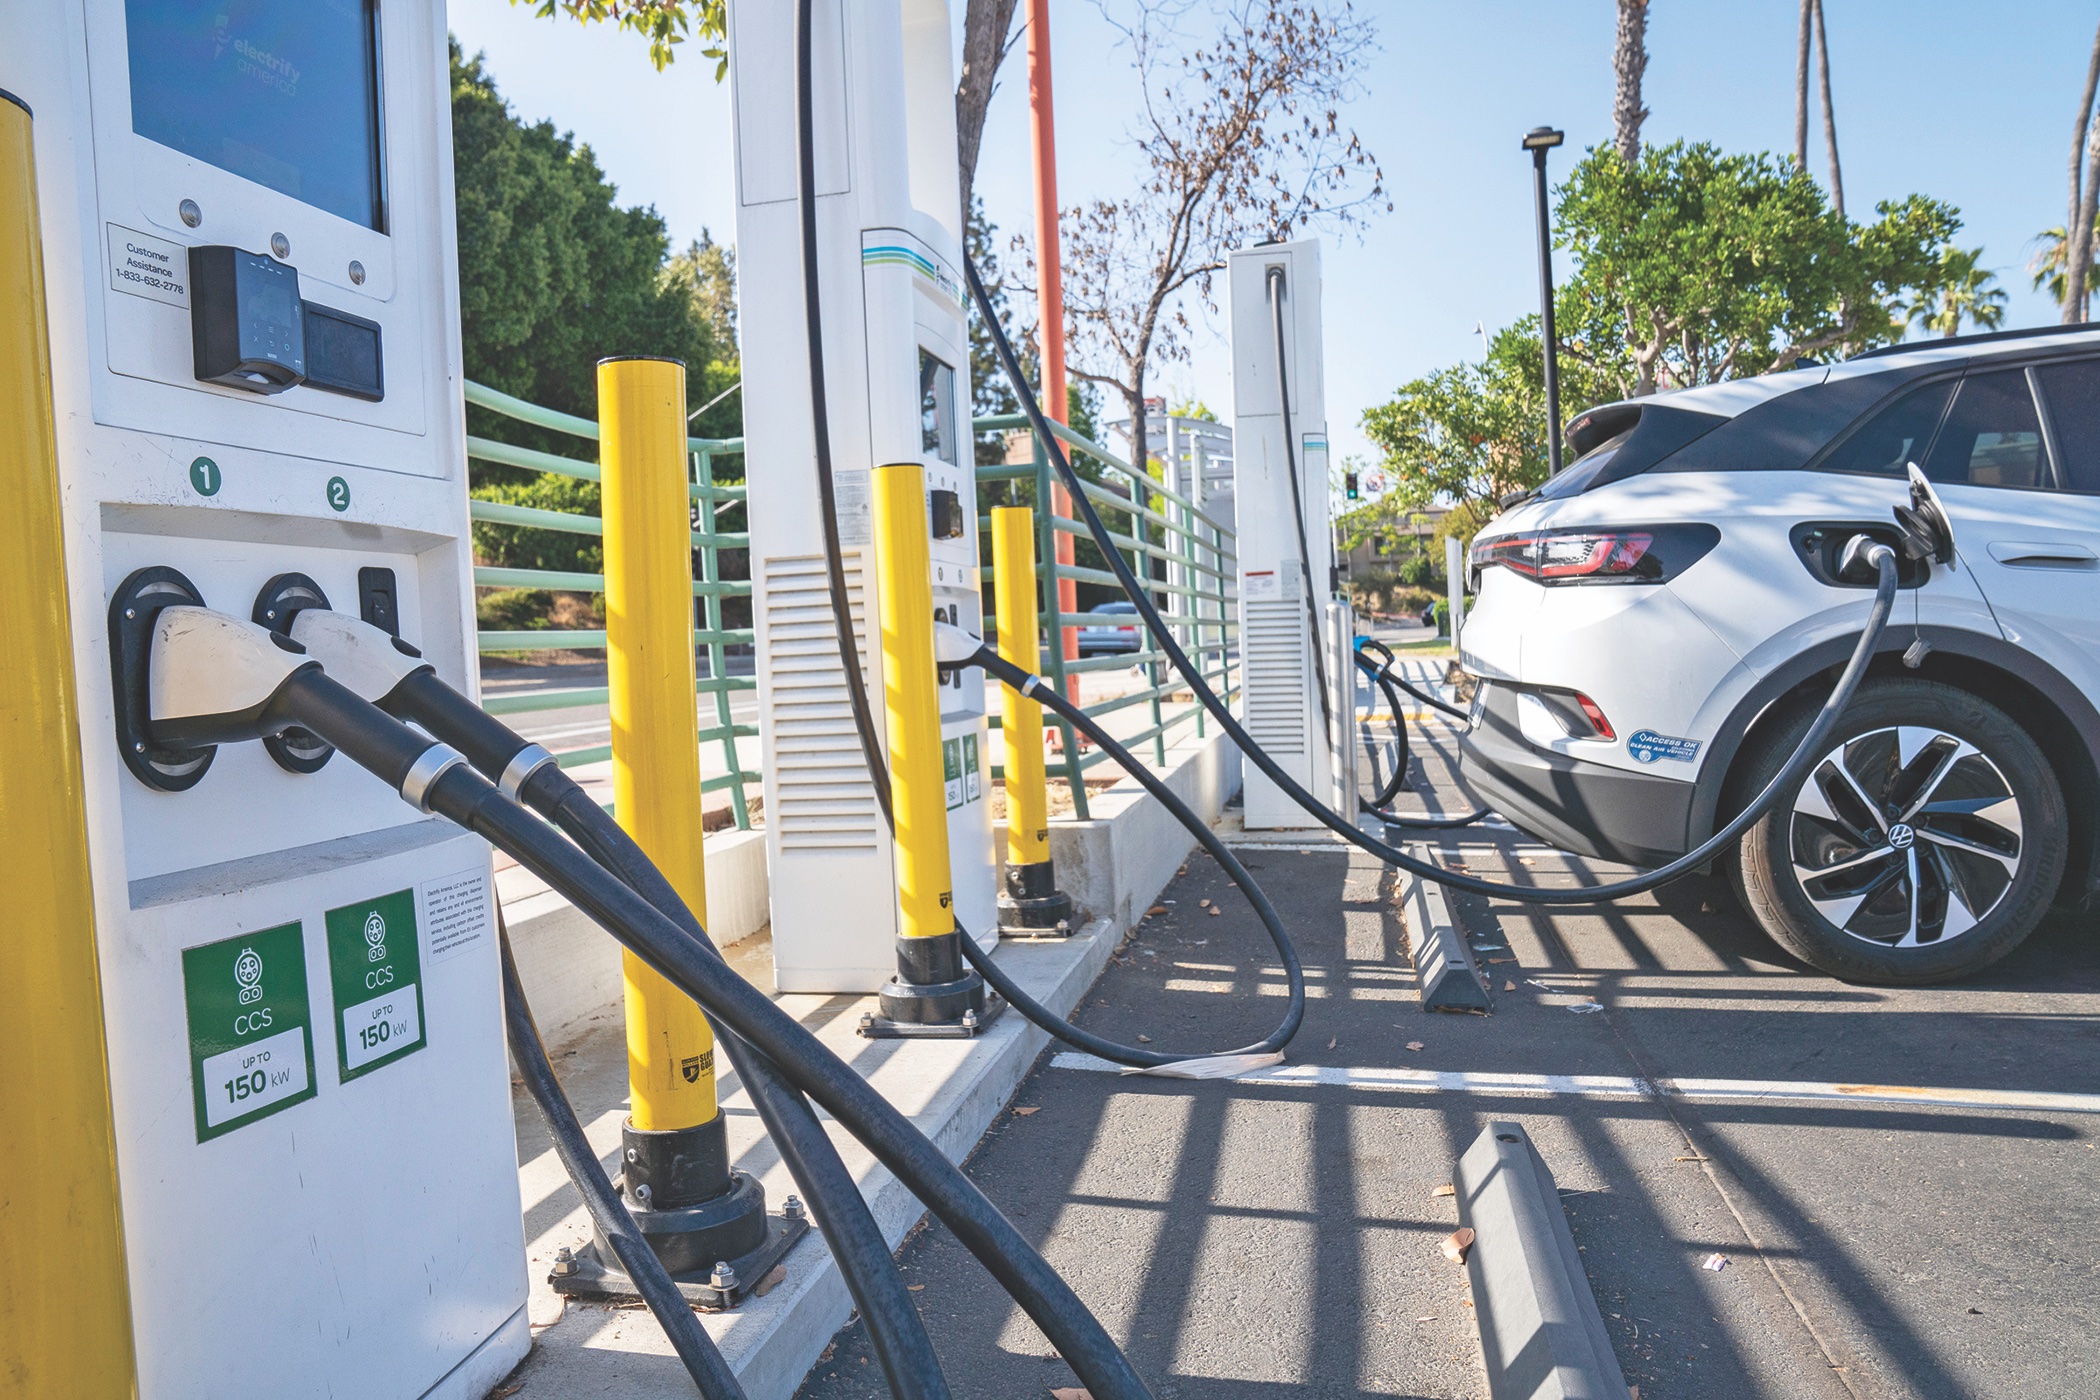 Electrify America, Walmart Announce Completion of Over 120 Charging Stations  at Walmart Stores Nationwide with Plans for Further Expansion